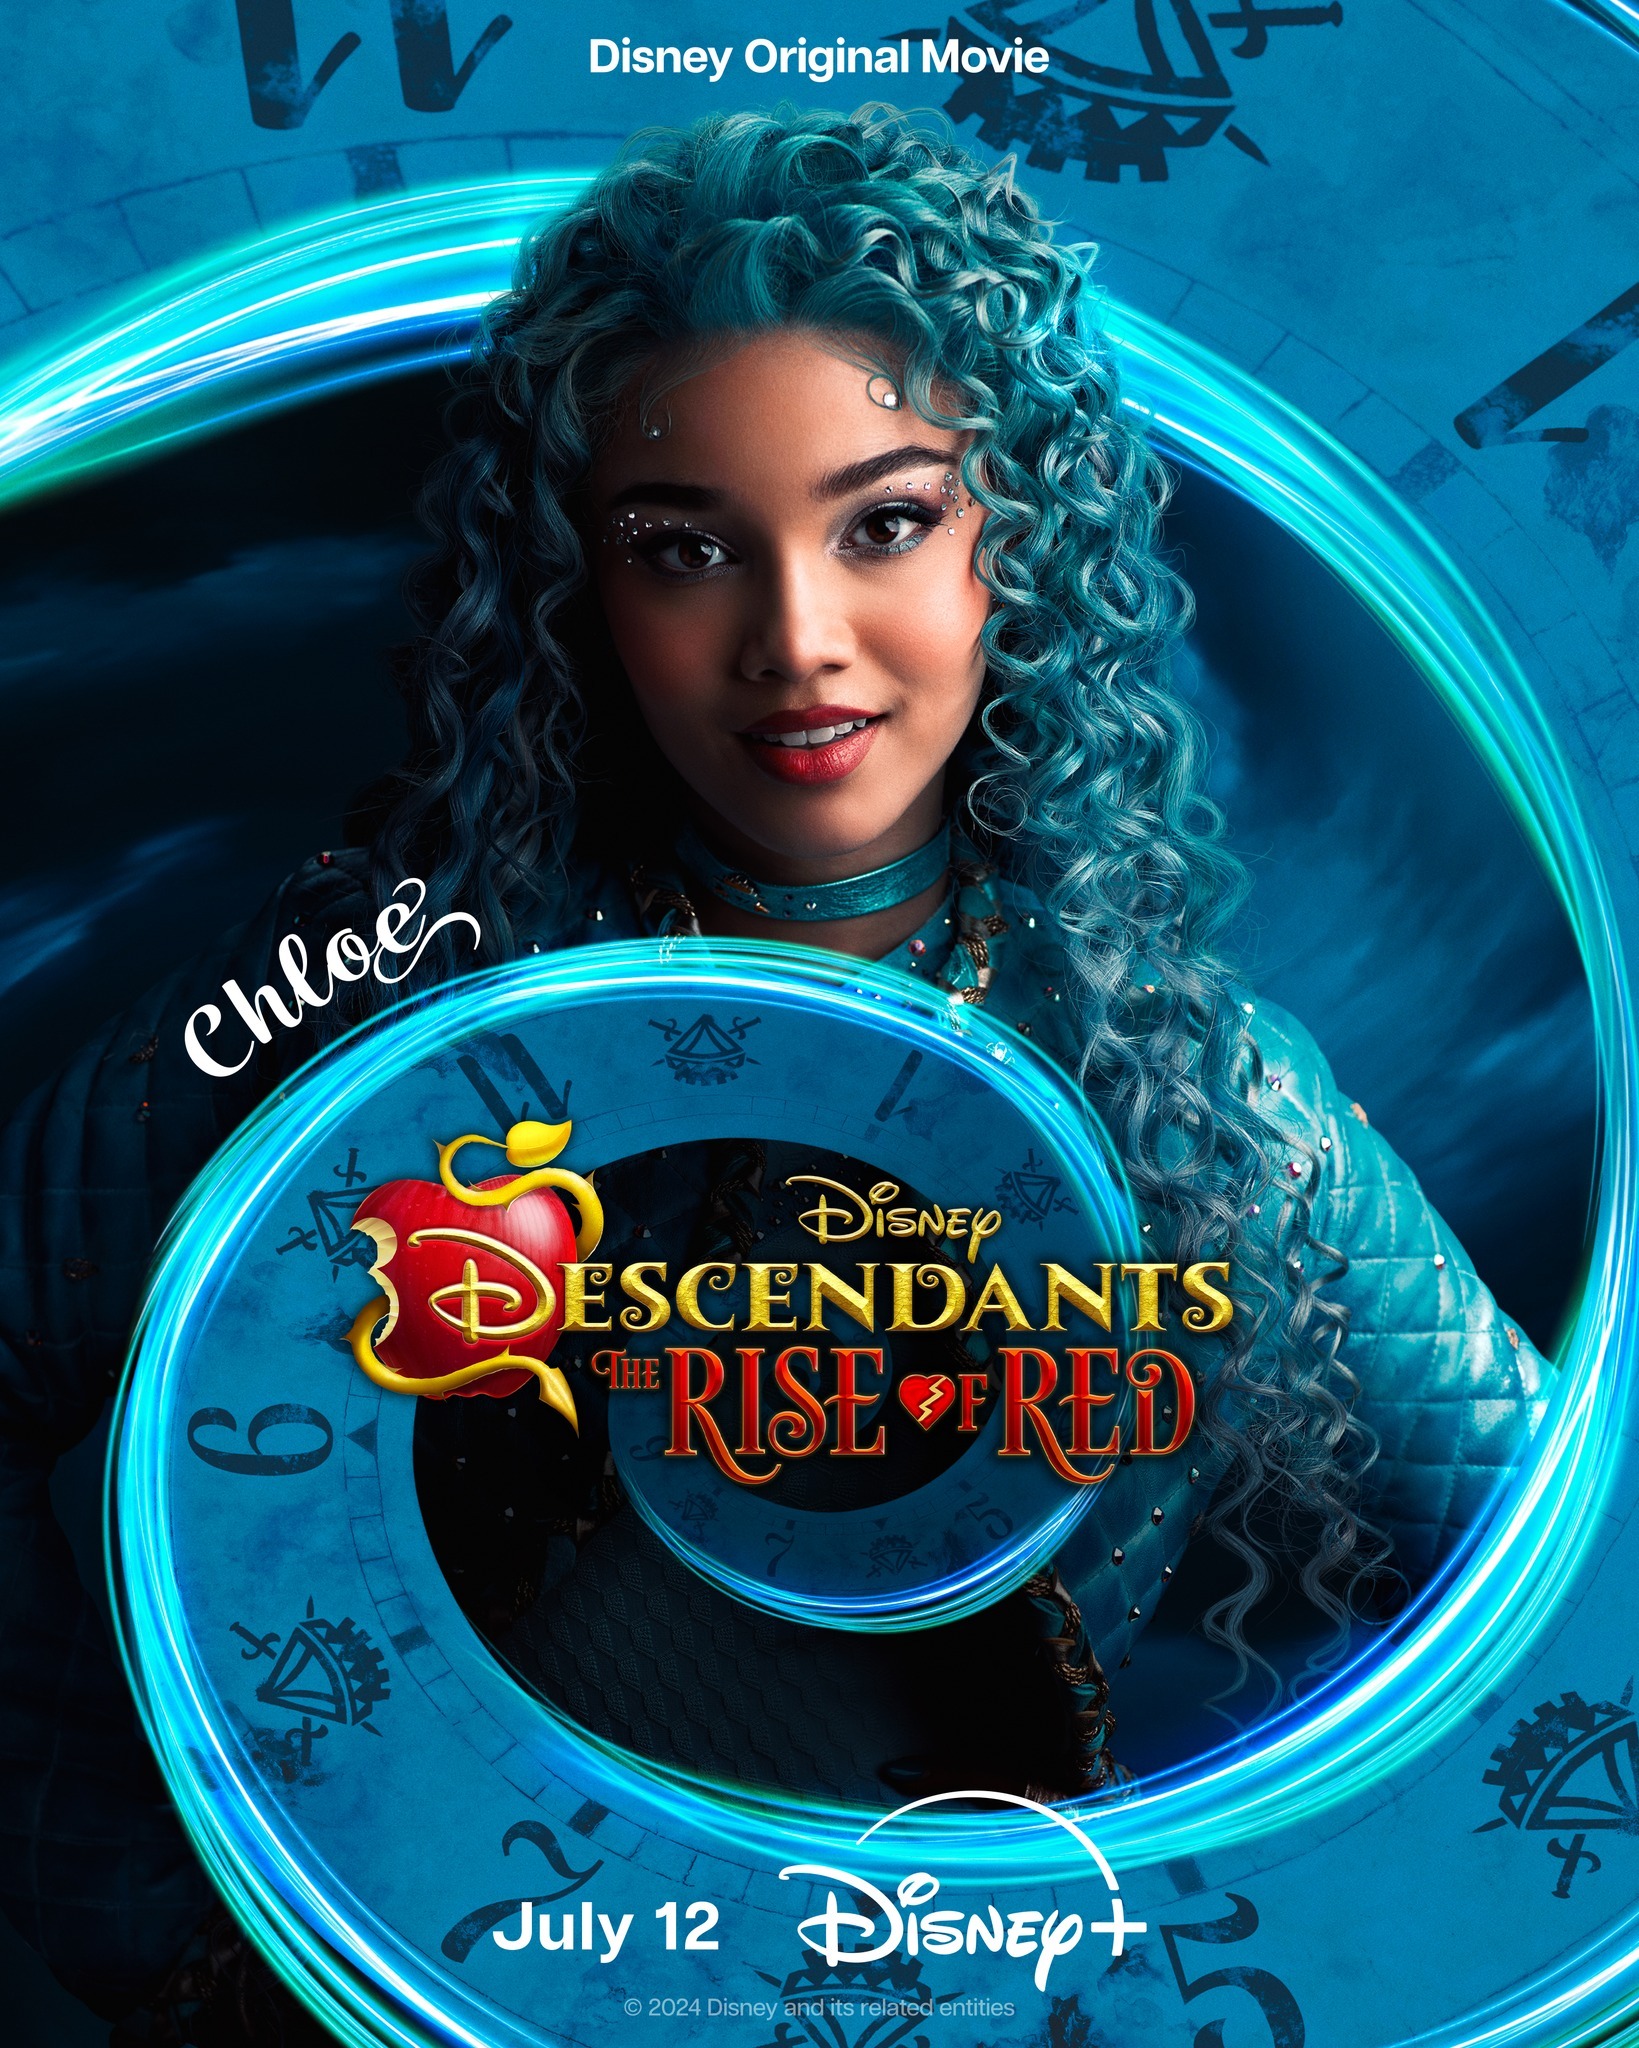 Mega Sized Movie Poster Image for Descendants: The Rise of Red (#10 of 11)